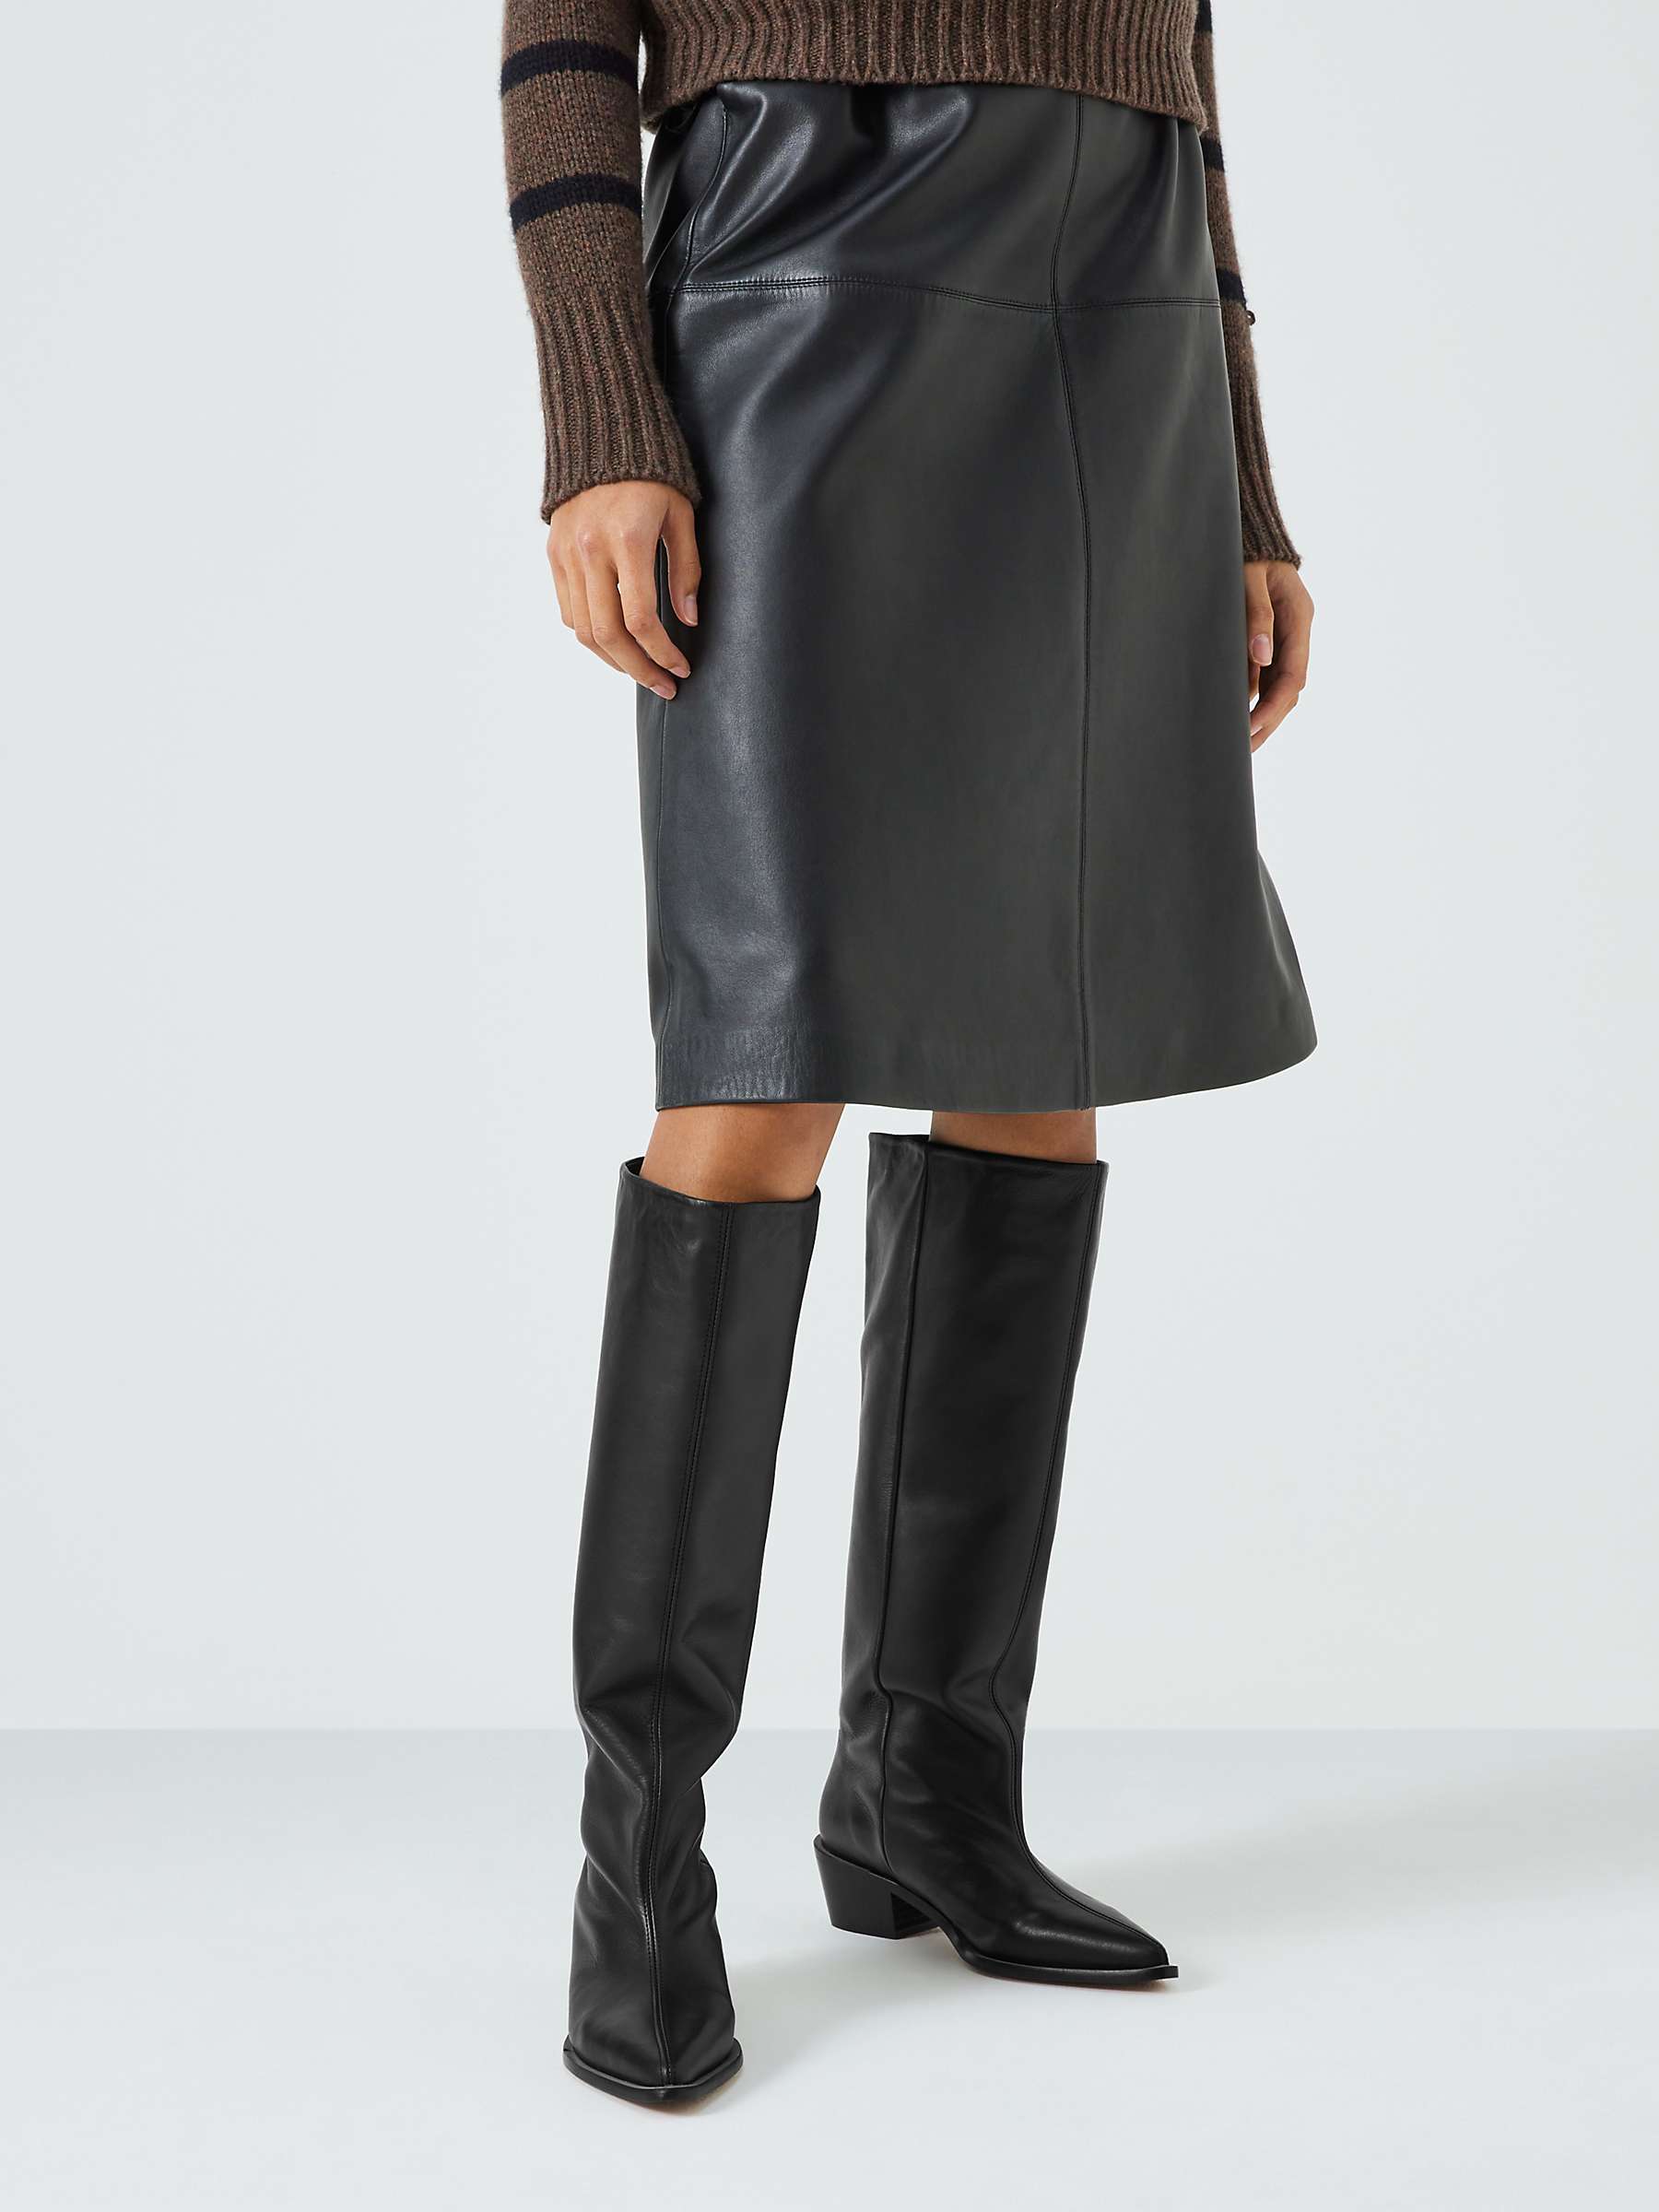 AND/OR Sainte Leather Low Heel Long Western Boots, Black at John Lewis ...